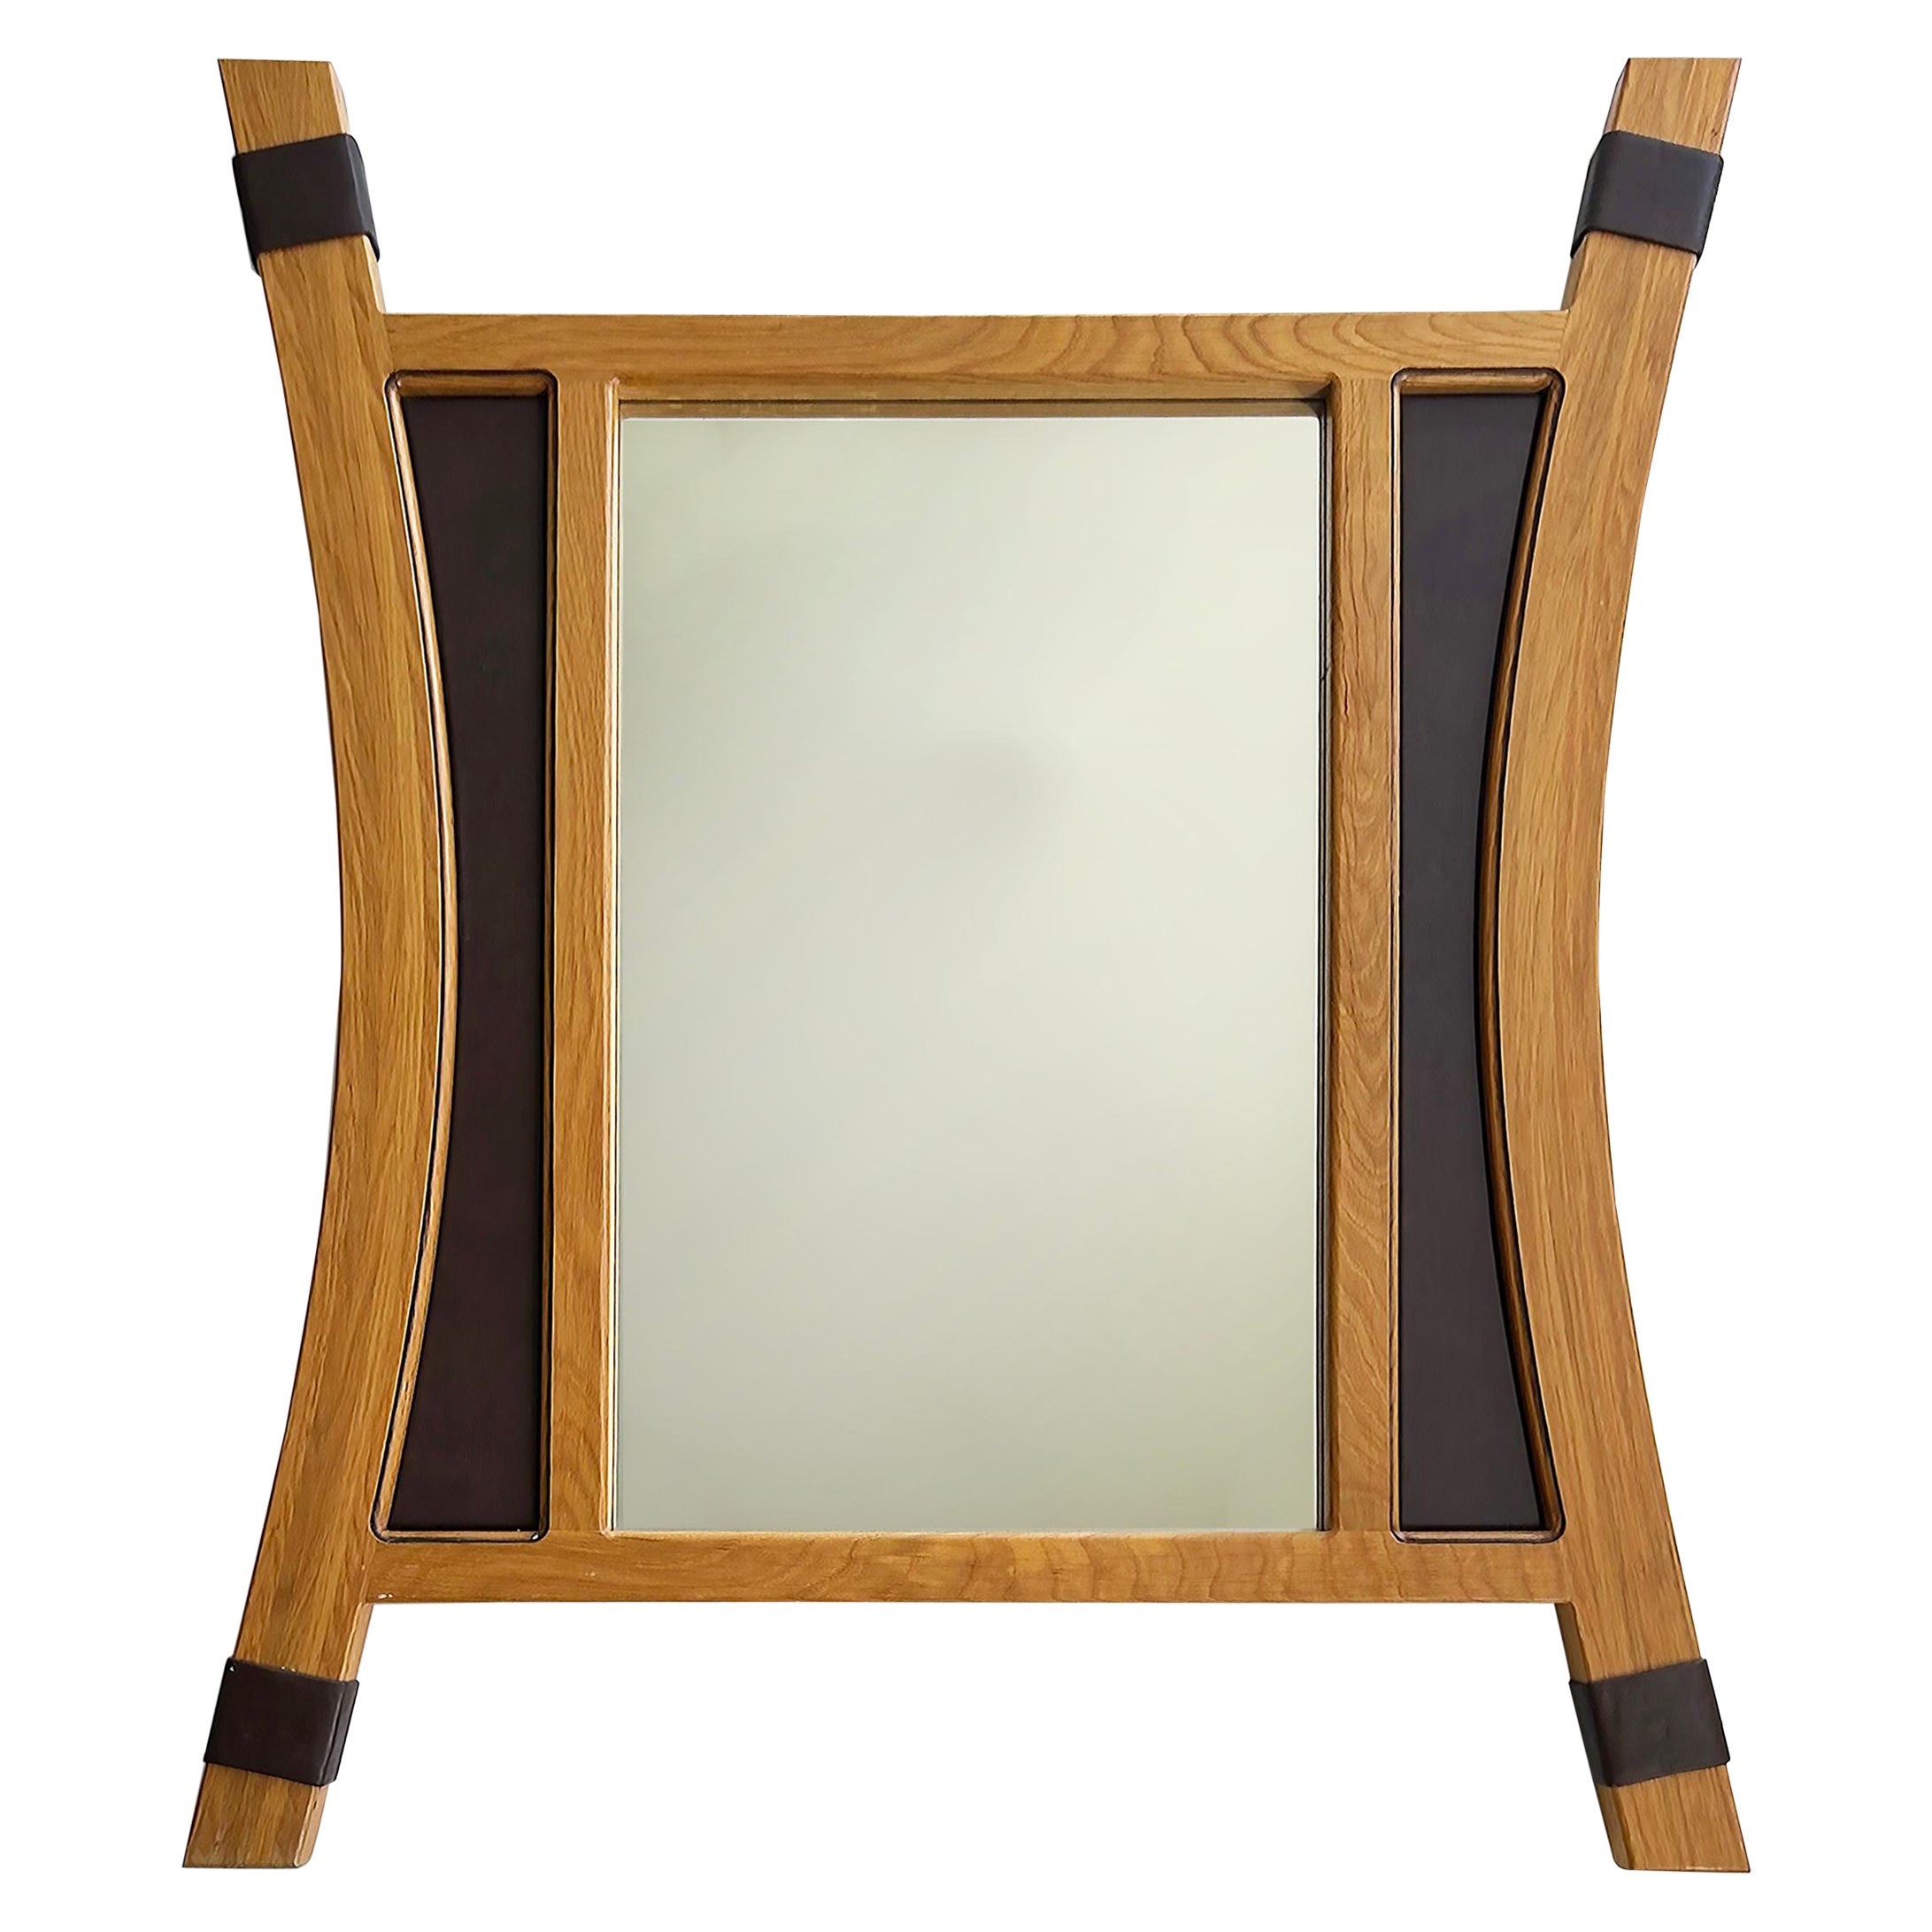 2012 Artist Signed Oak and Leather Studio Crafted Wall Mirror  For Sale